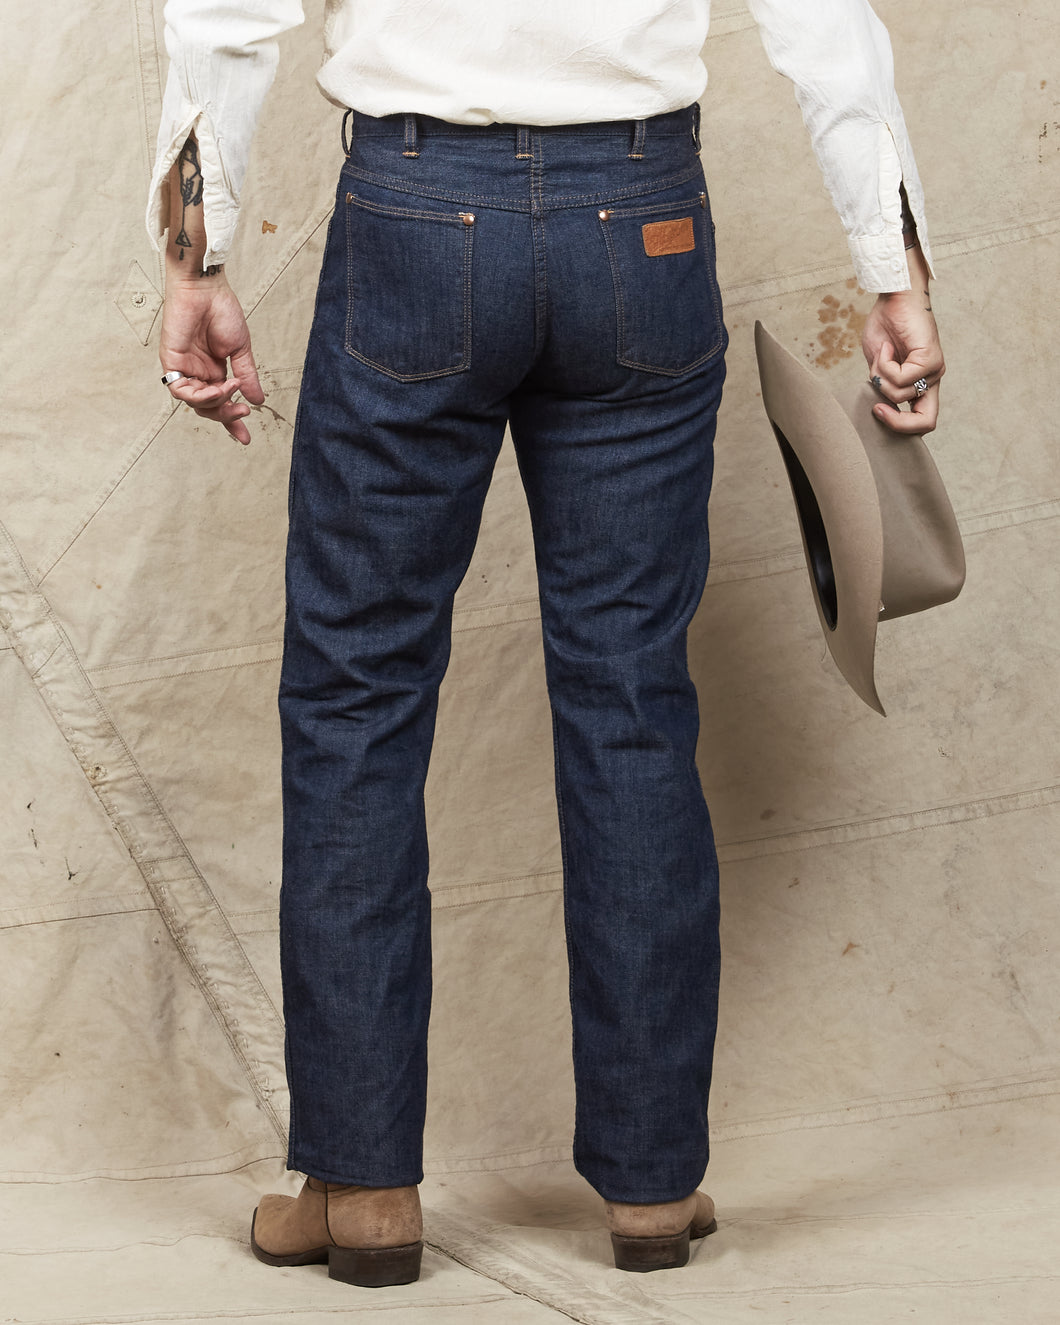 TCB Jeans Working Cat Hero Jeans